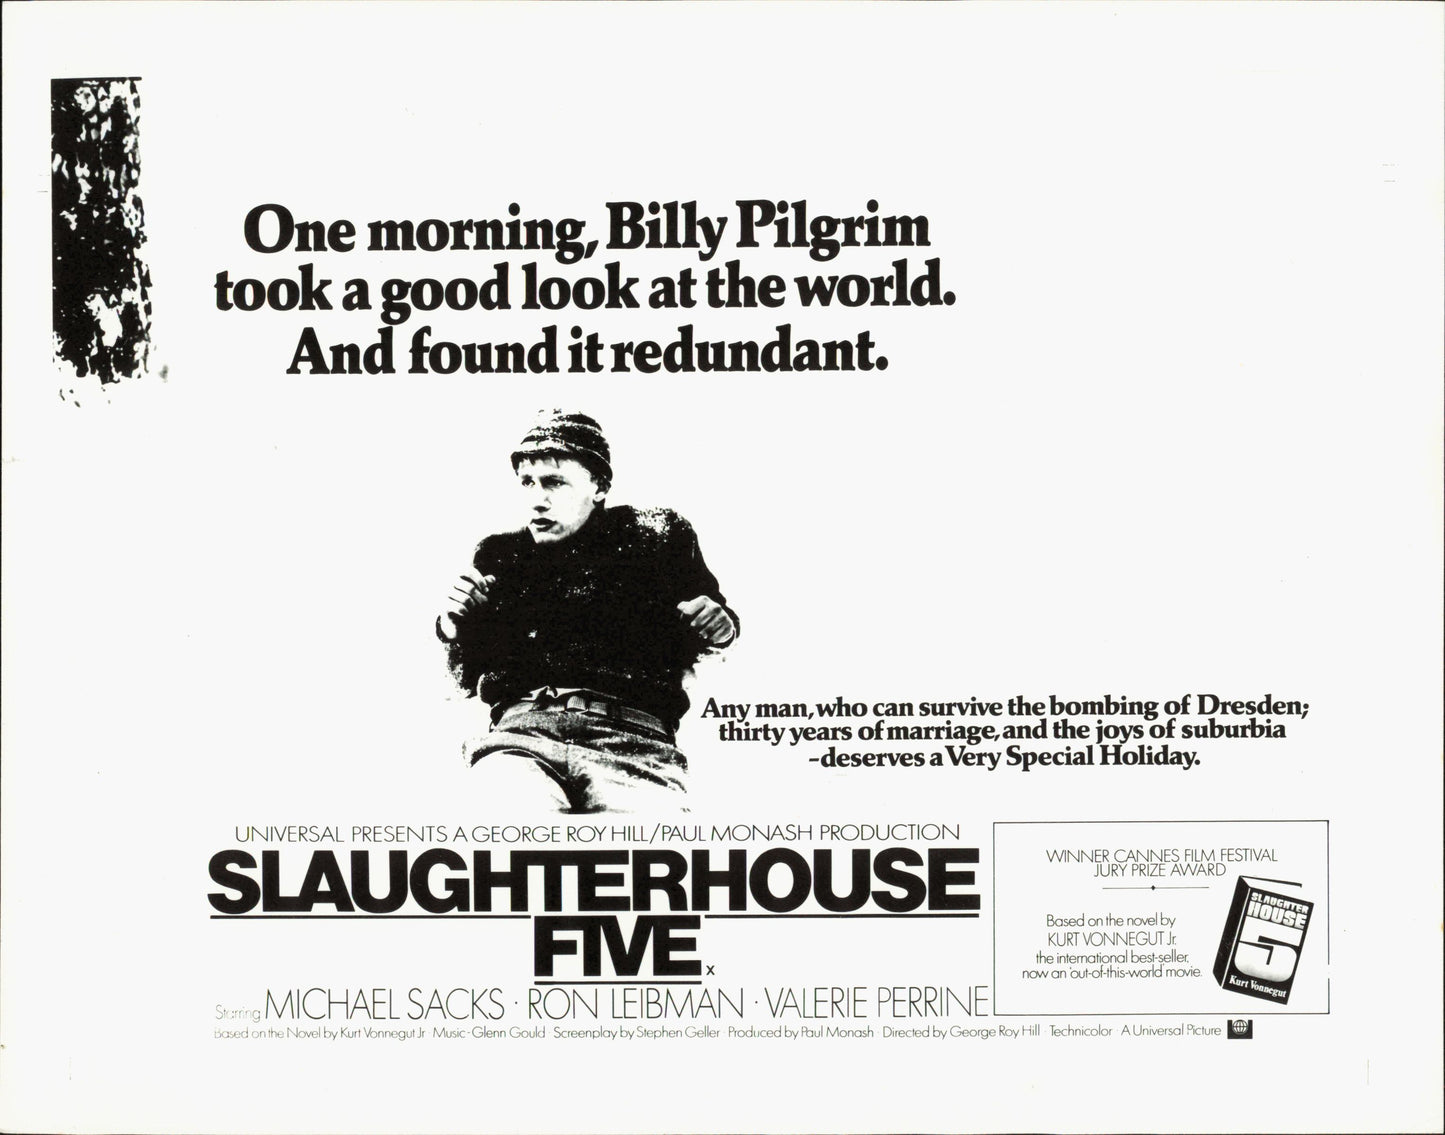 Slaughterhouse-Five Collection (1972) (14 vintage images) Film Hollywood Science Slaughterhouse 5 WWII